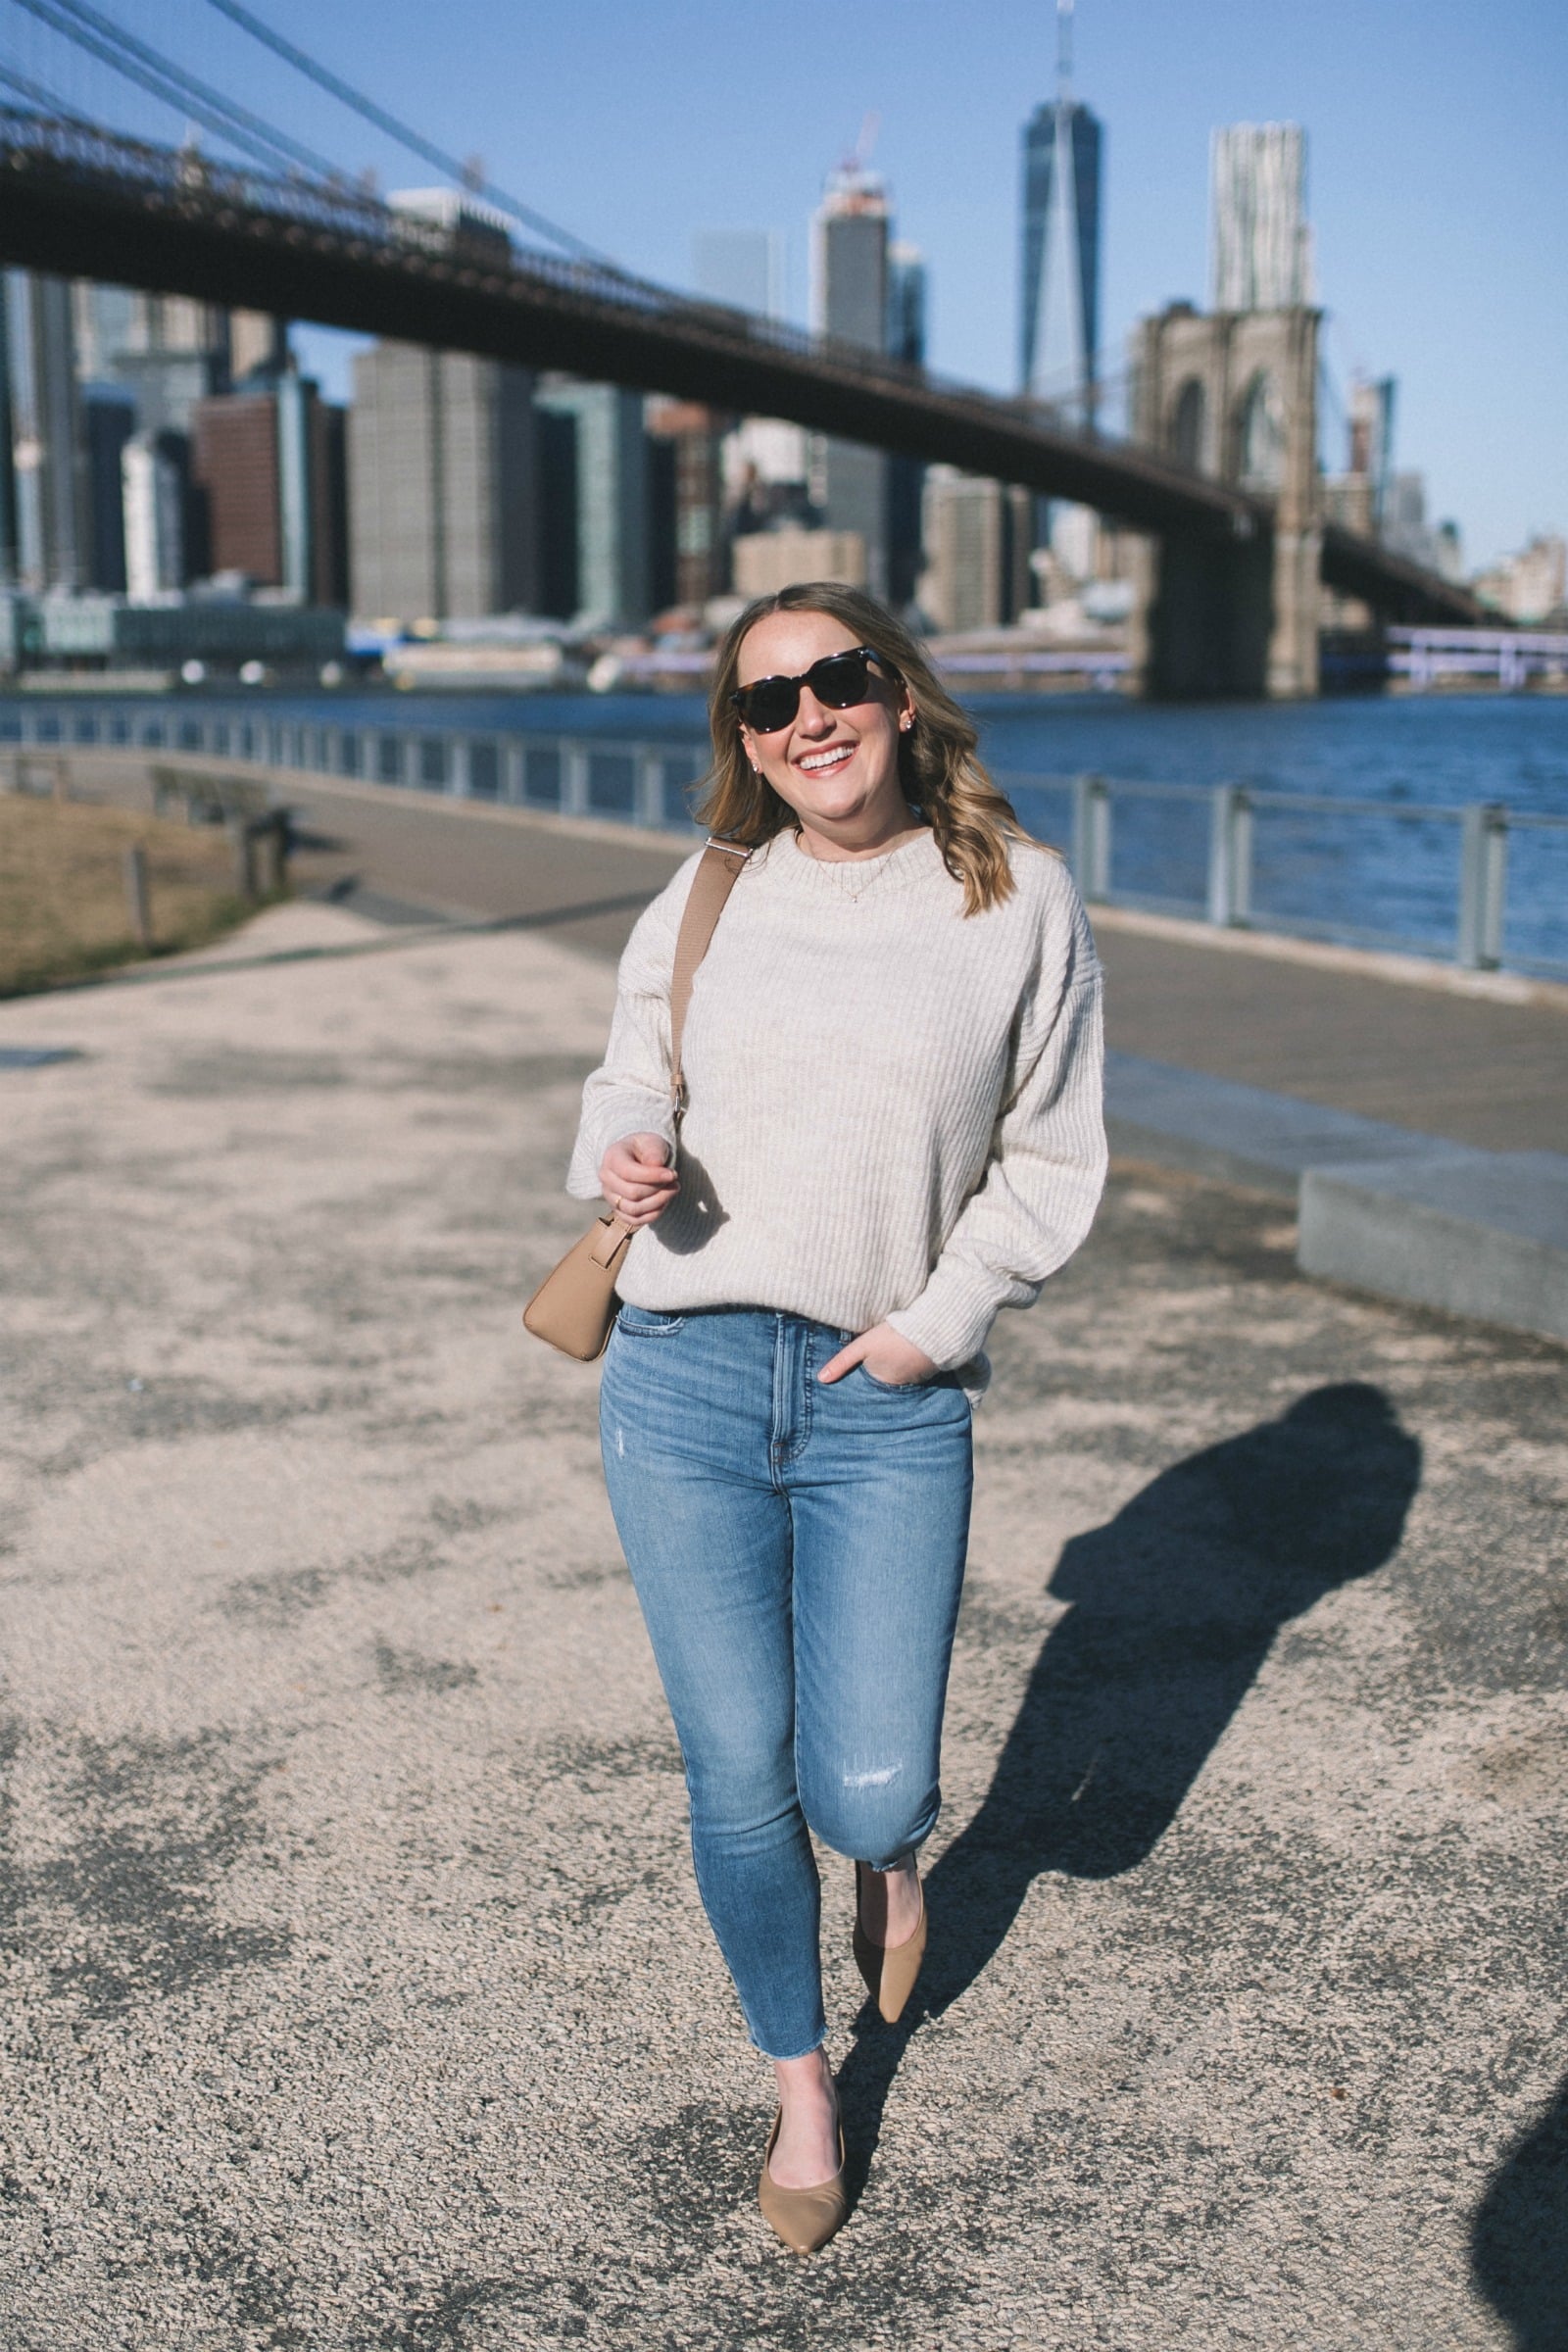 Easy Every Day Everlane Outfit I Things I Own That Are Currently On Sale